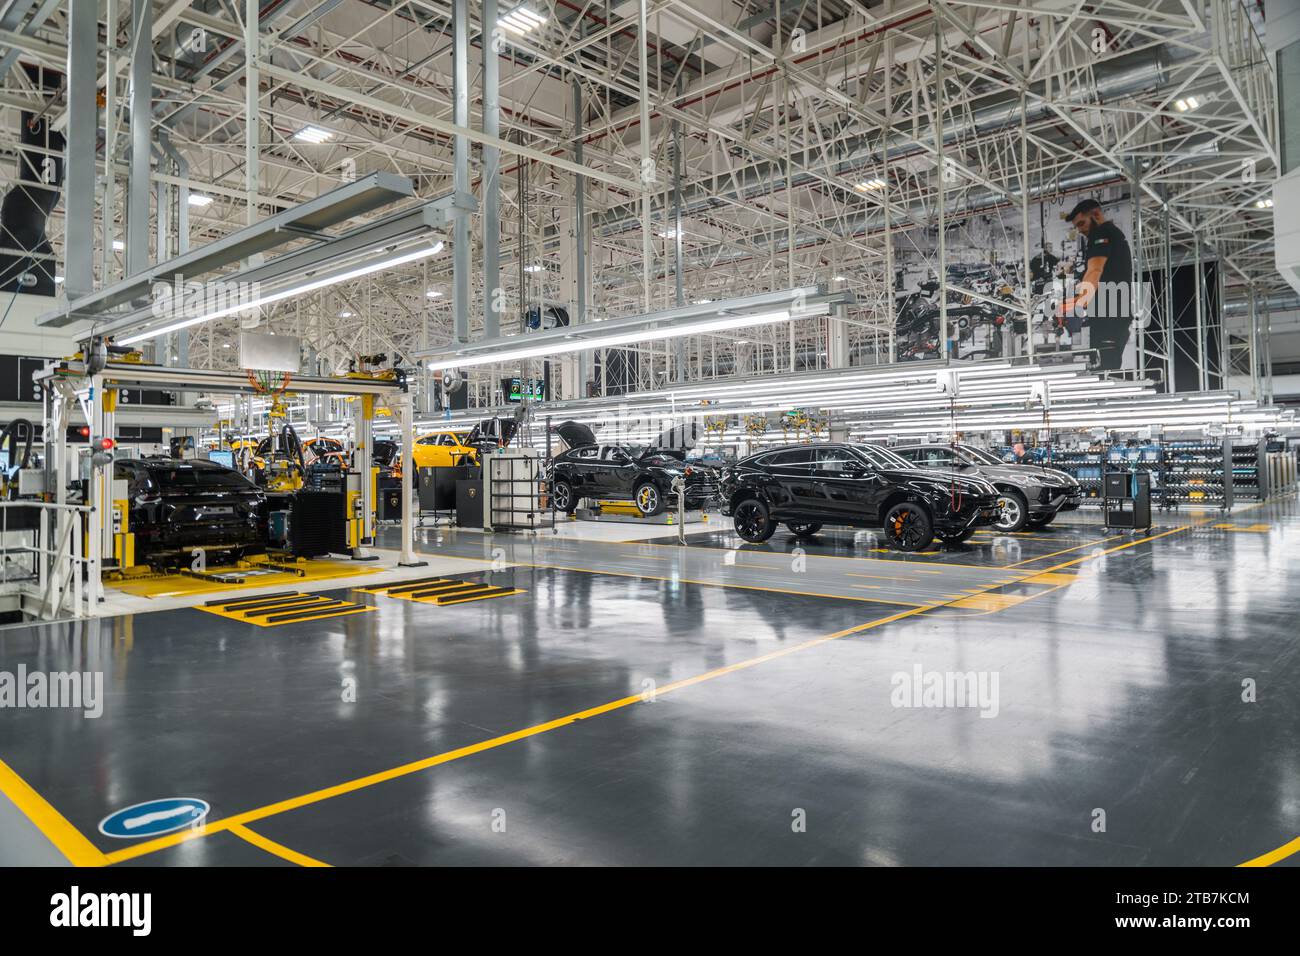 Italy, Sant’Agata Bolognese, Automobili Lamborghini’s plant, 2022/11/23: worker, viewed from behind, at work on a production line. Cabling Stock Photo